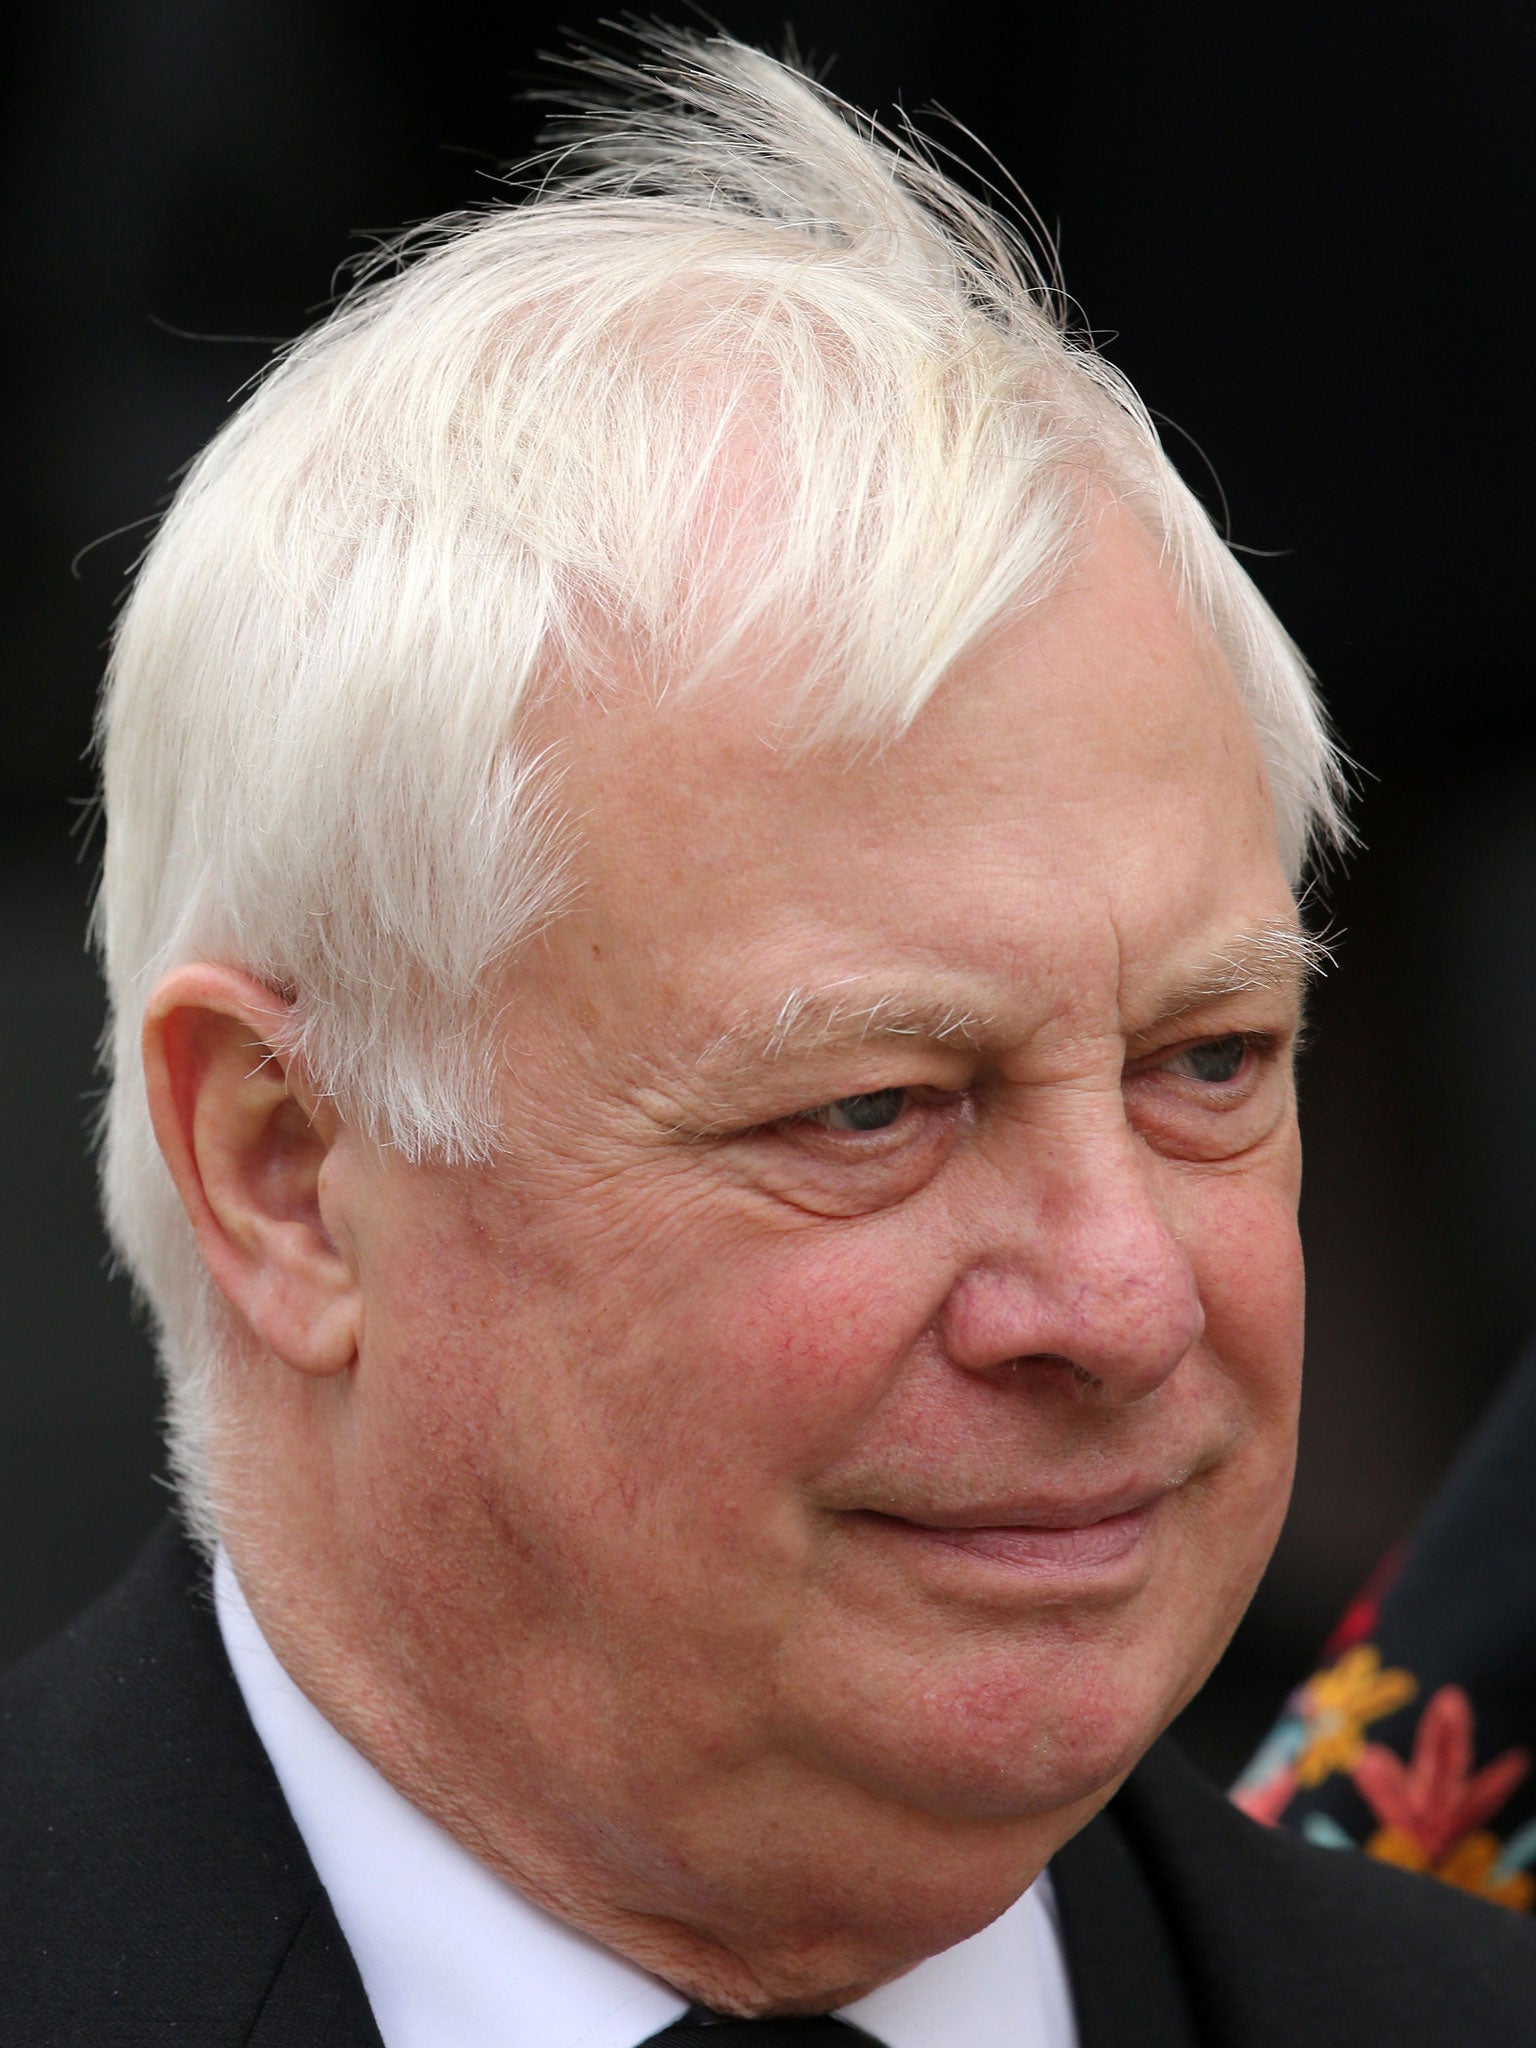 Lord Patten of Barnes has suggested that Conservative eurosceptics could be sending the party down the path to political suicide if they show they are unwilling to accept British membership of the EU in any form